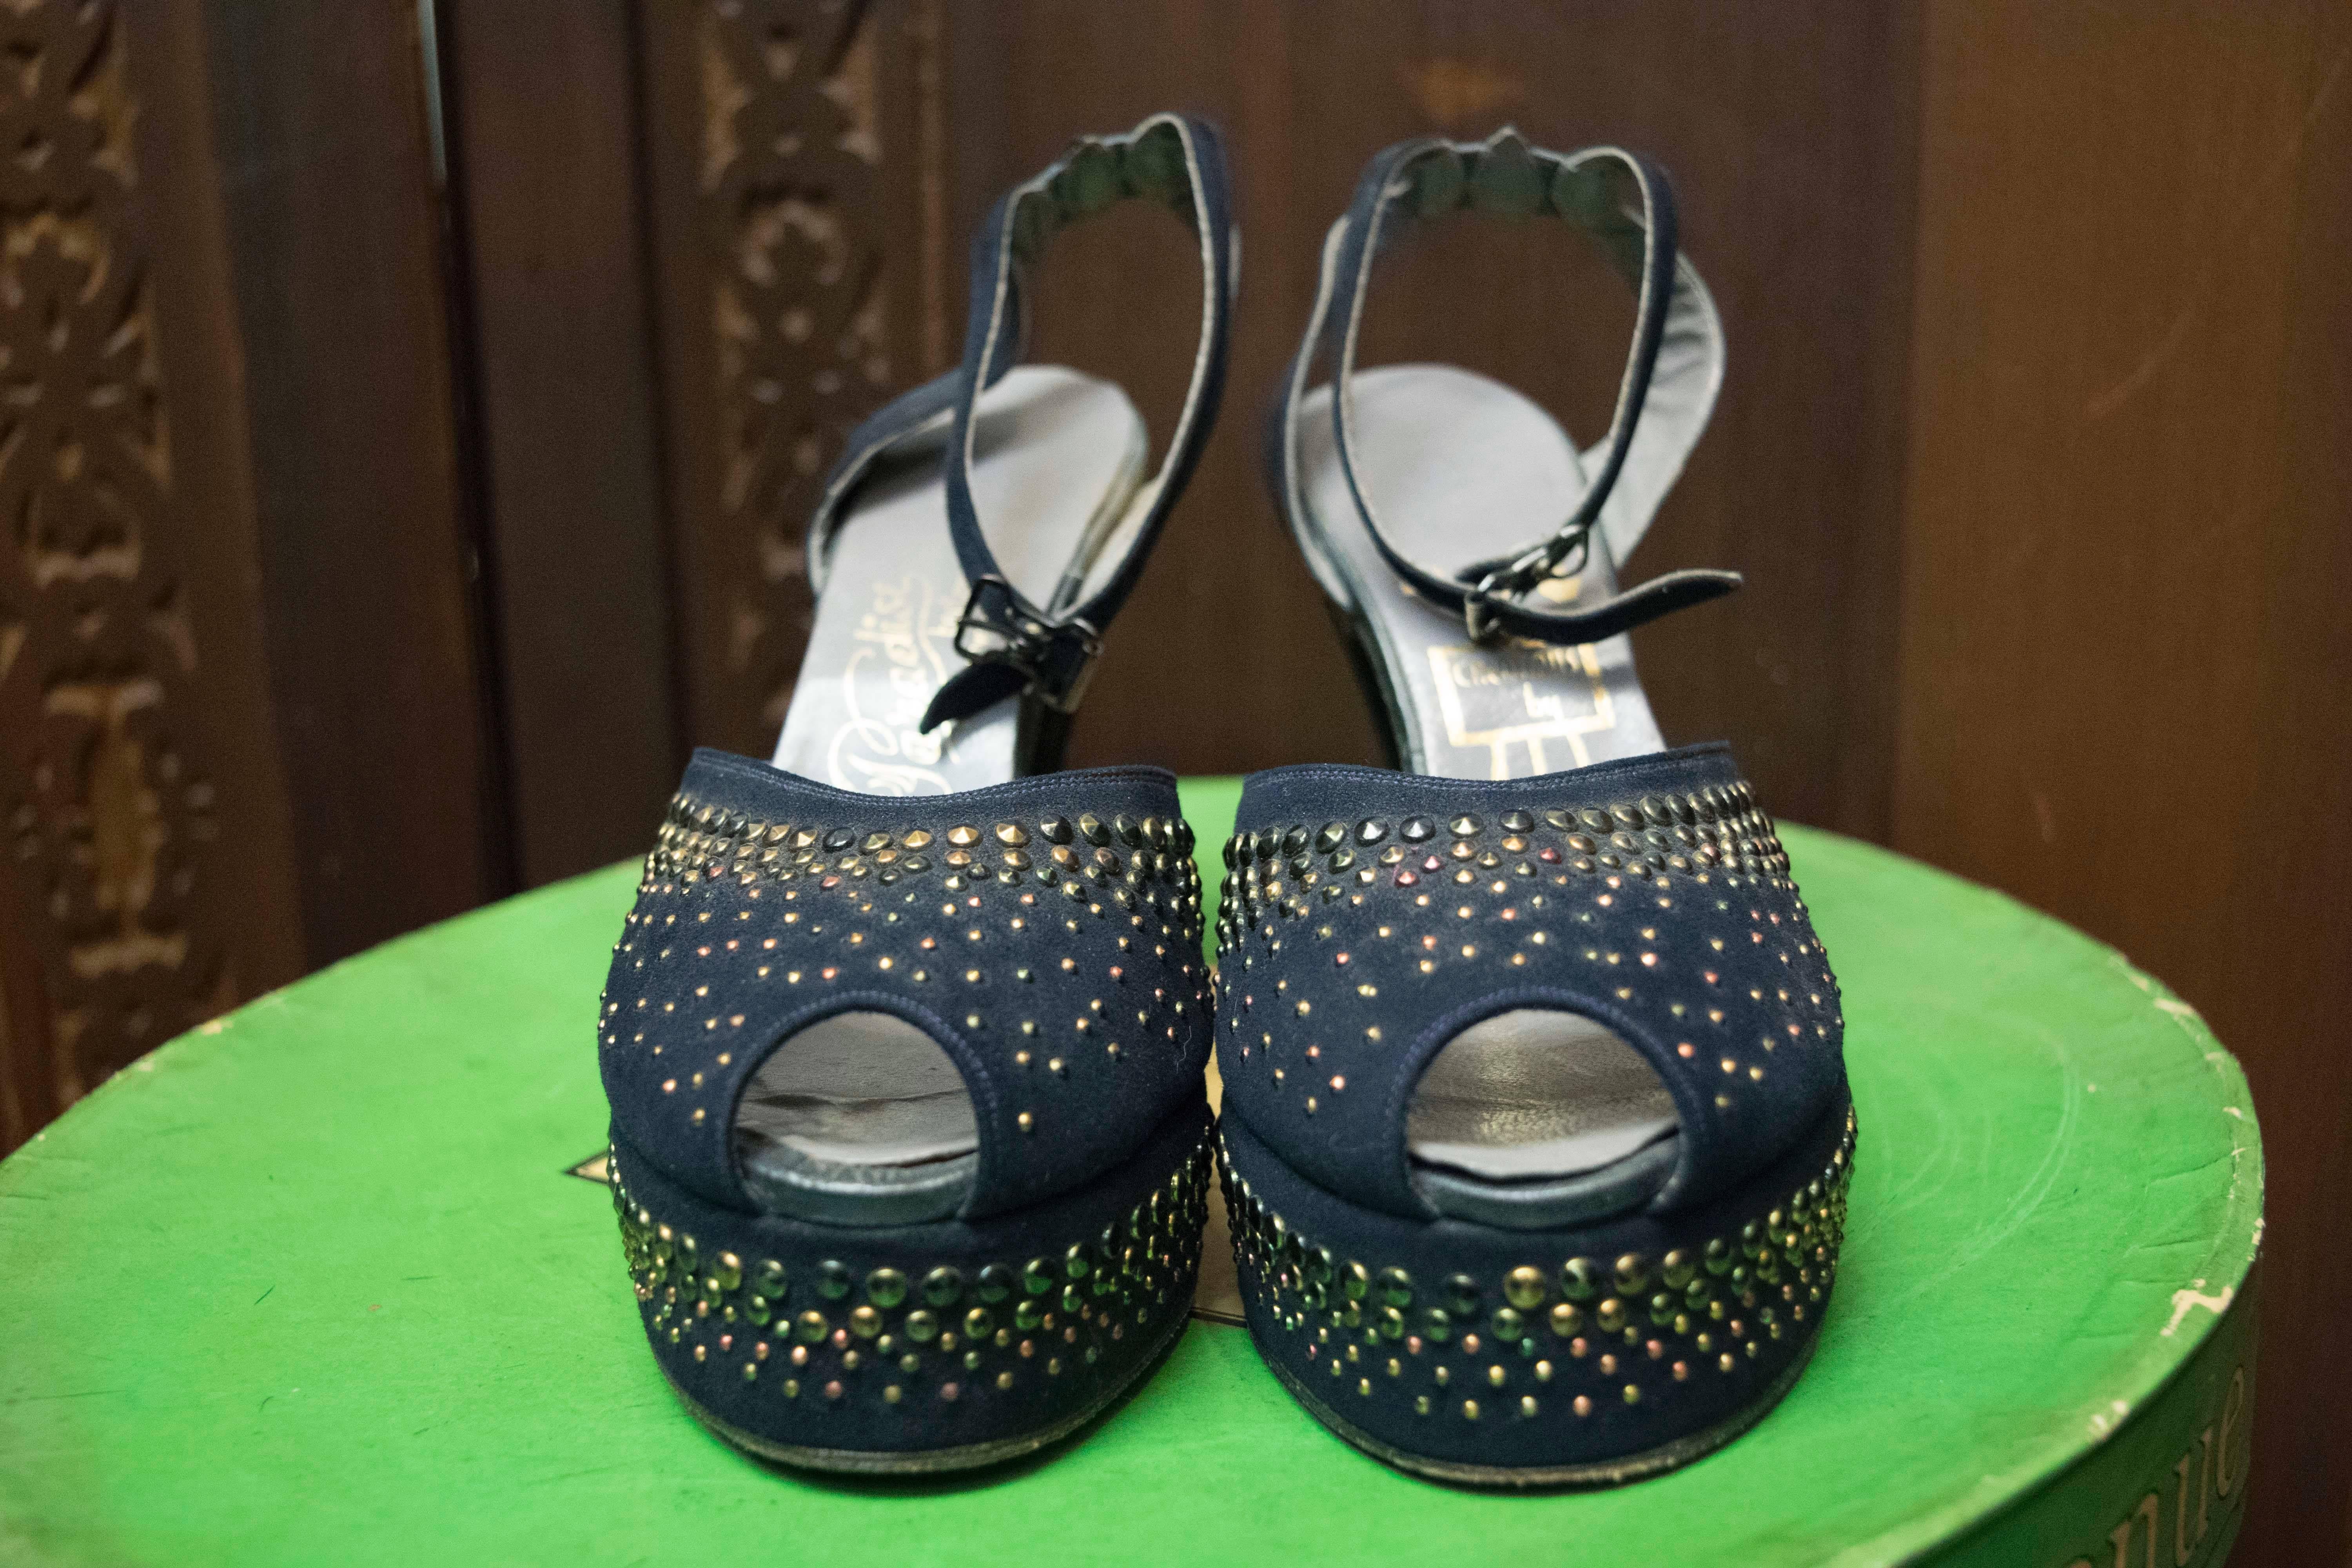 1940s Navy Studded Platfrom Shoes

Size 4.5 US